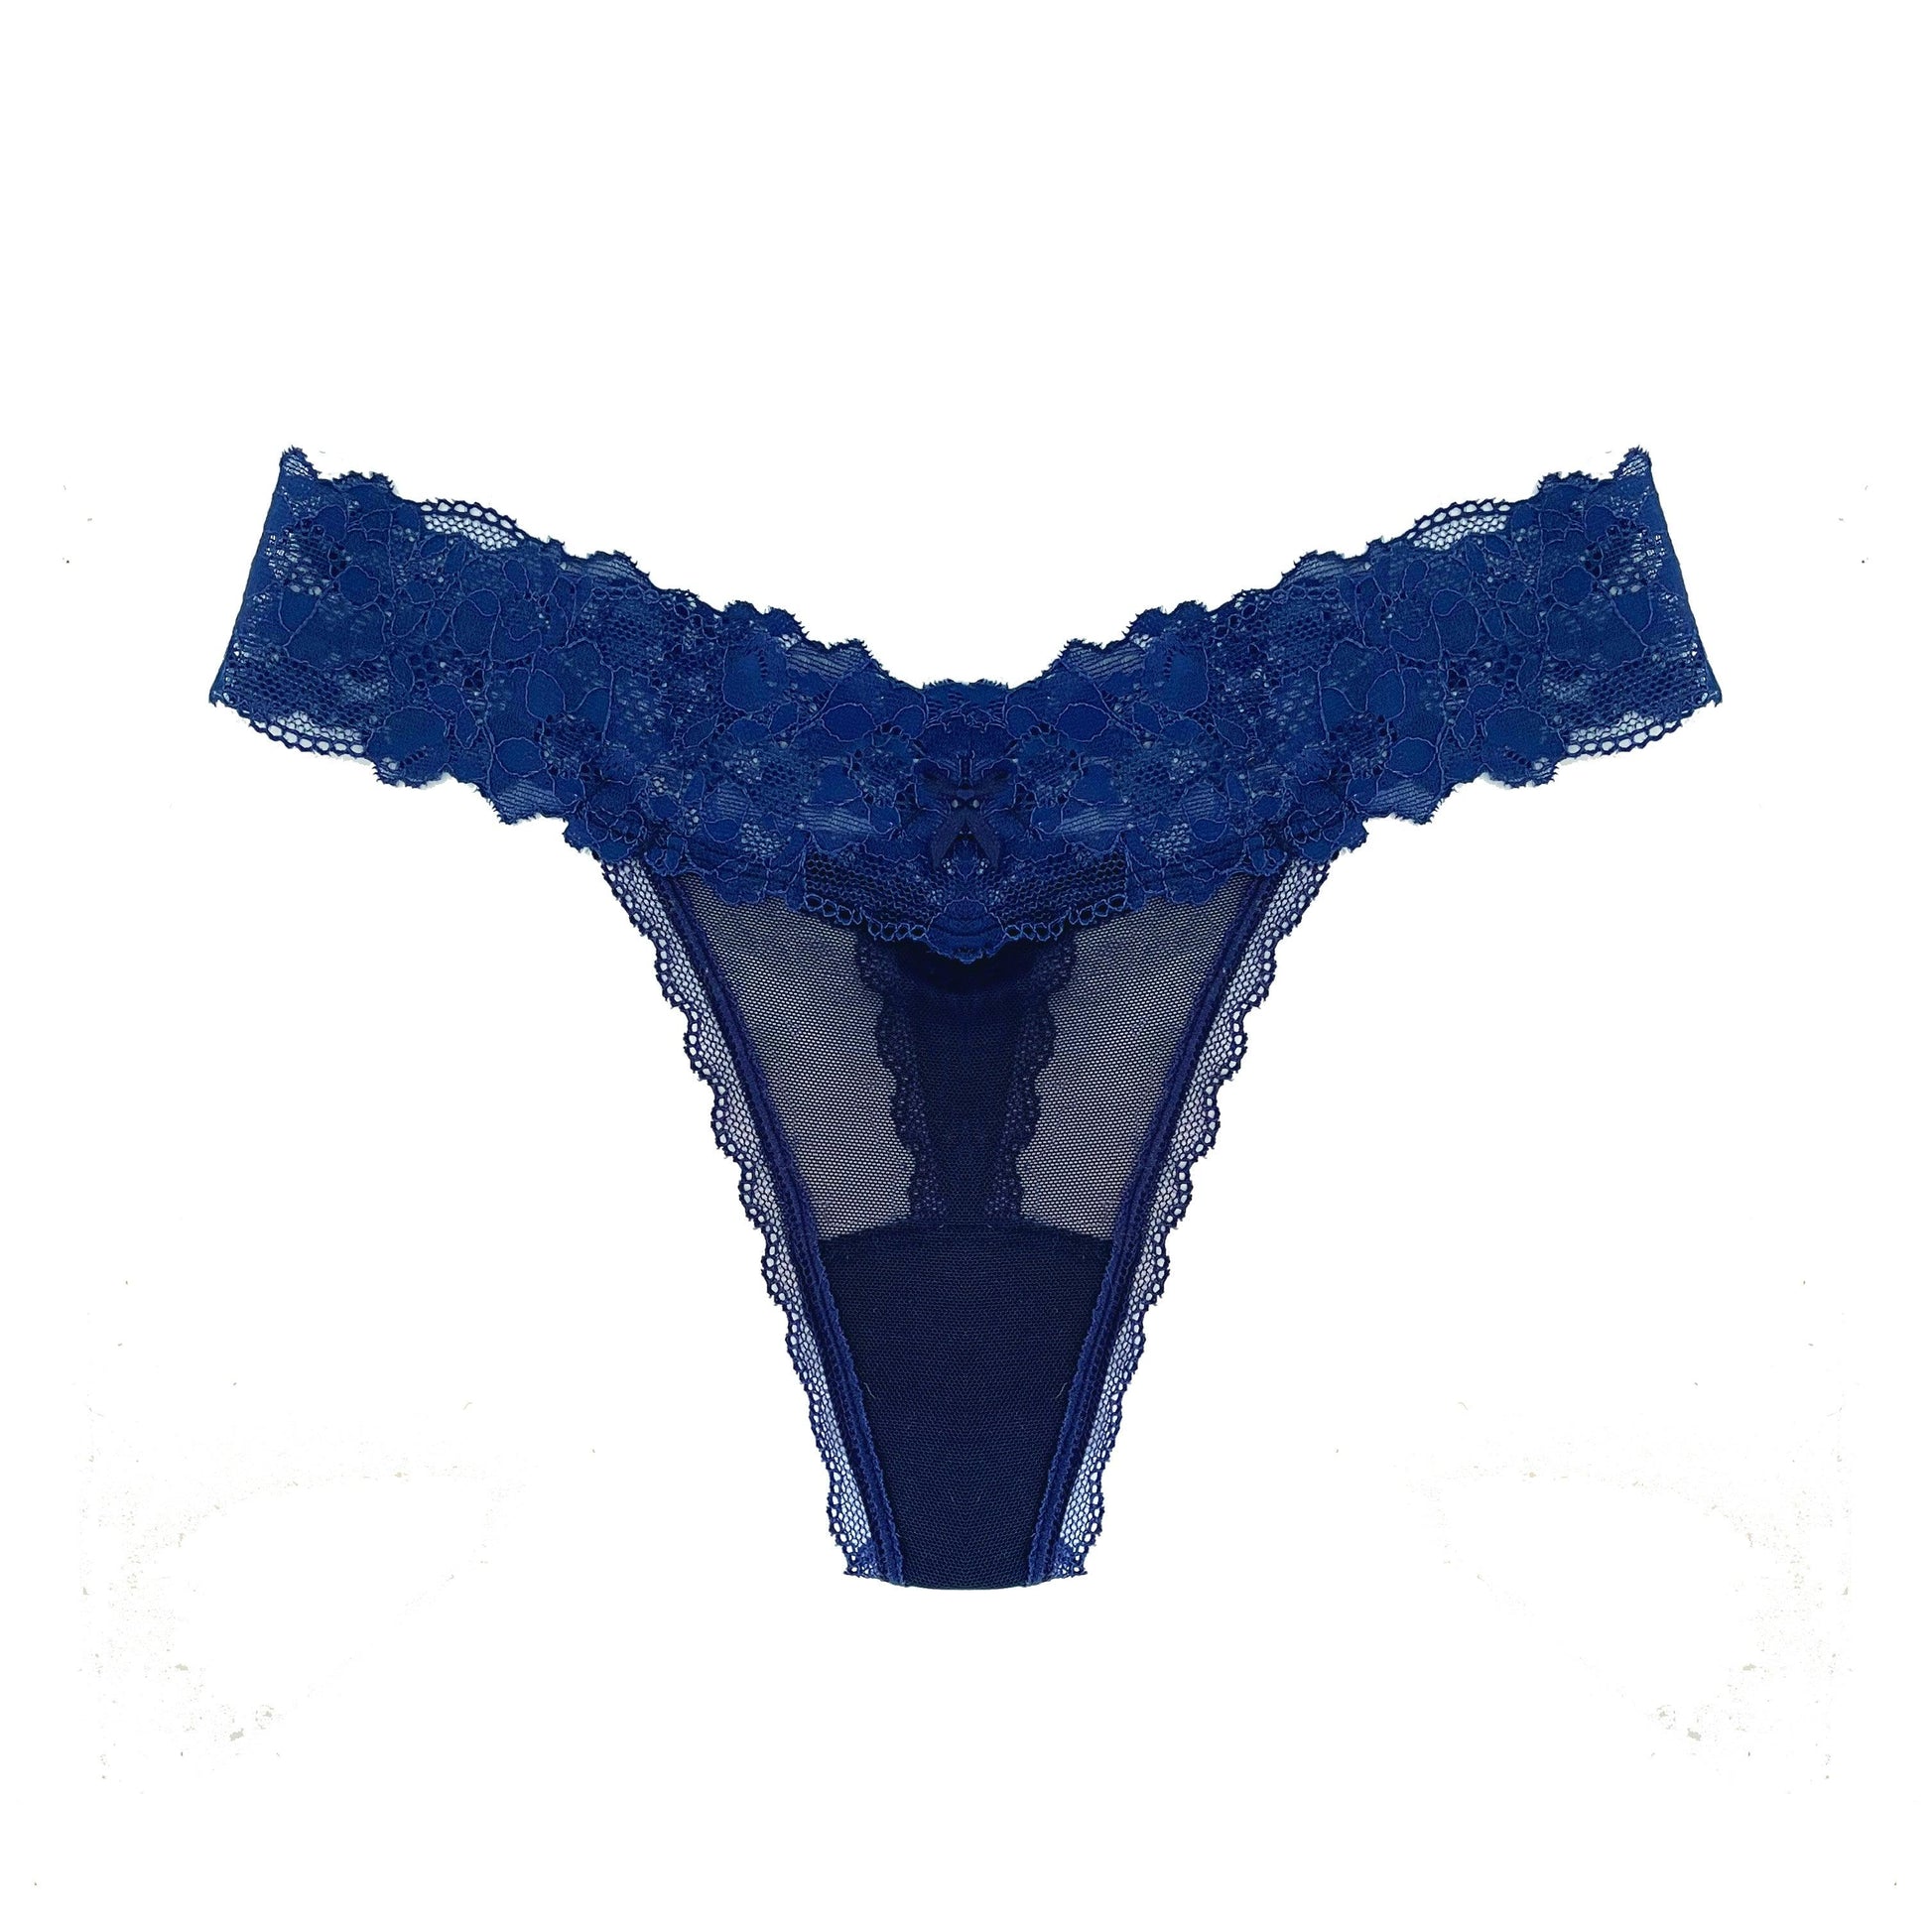 Barely There Thong in Midnight Blue - Takkleberry